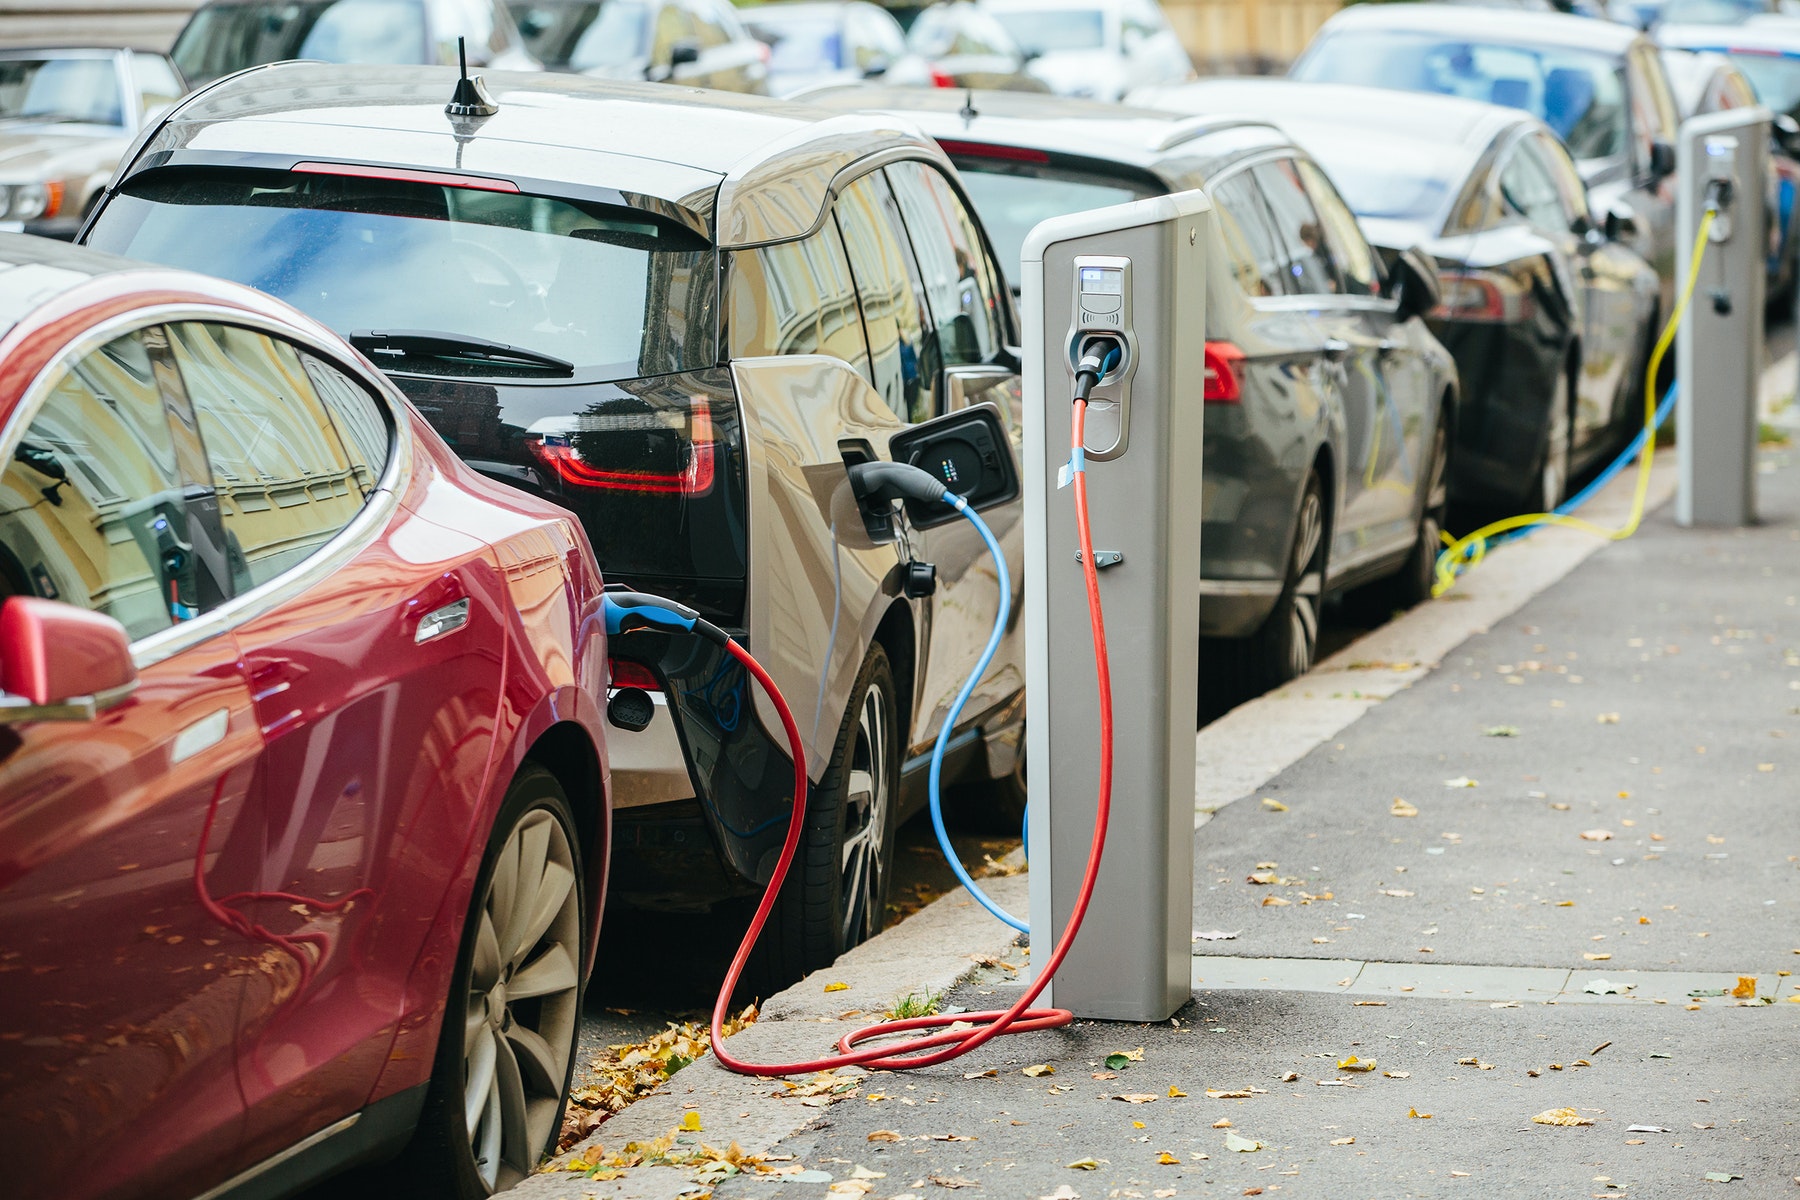 An In Depth Look at the Electric Vehicle Industry